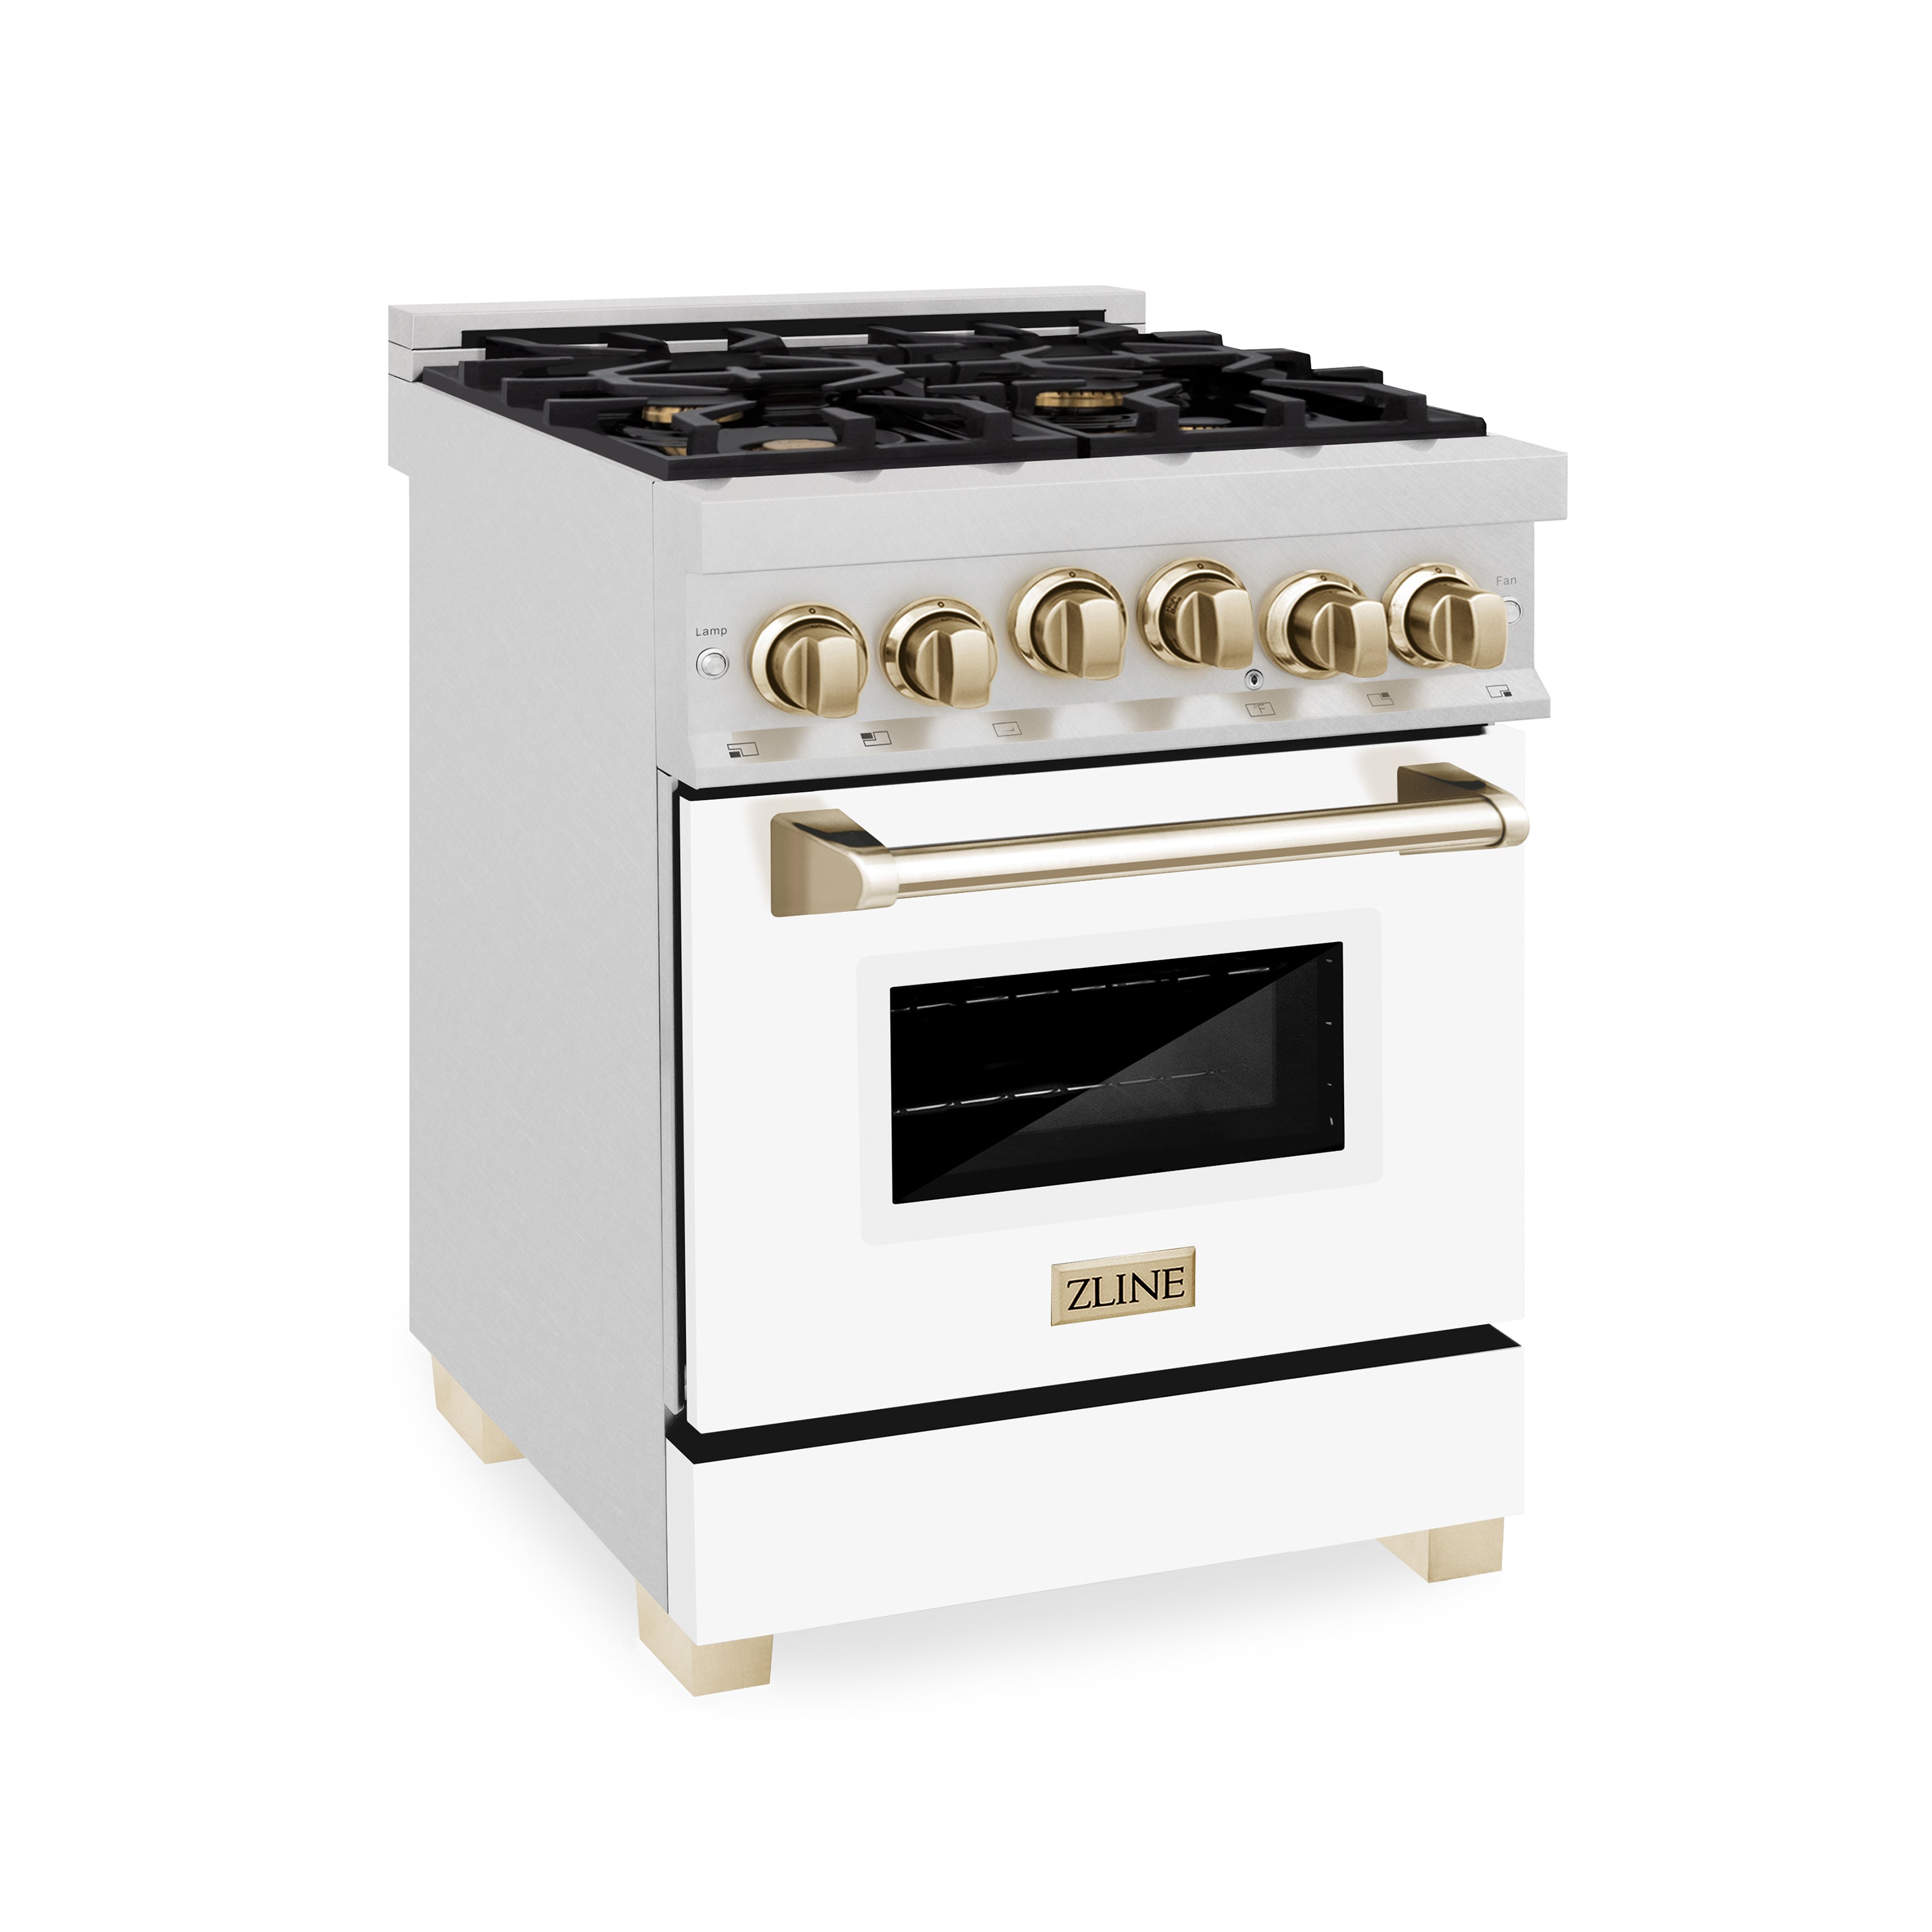 ZLINE Autograph Edition 24" 2.8 cu. ft. Range with Gas Stove and Gas Oven in Fingerprint Resistant Stainless Steel with White Matte Door and Polished Gold Accents (RGSZ-WM-24-G)